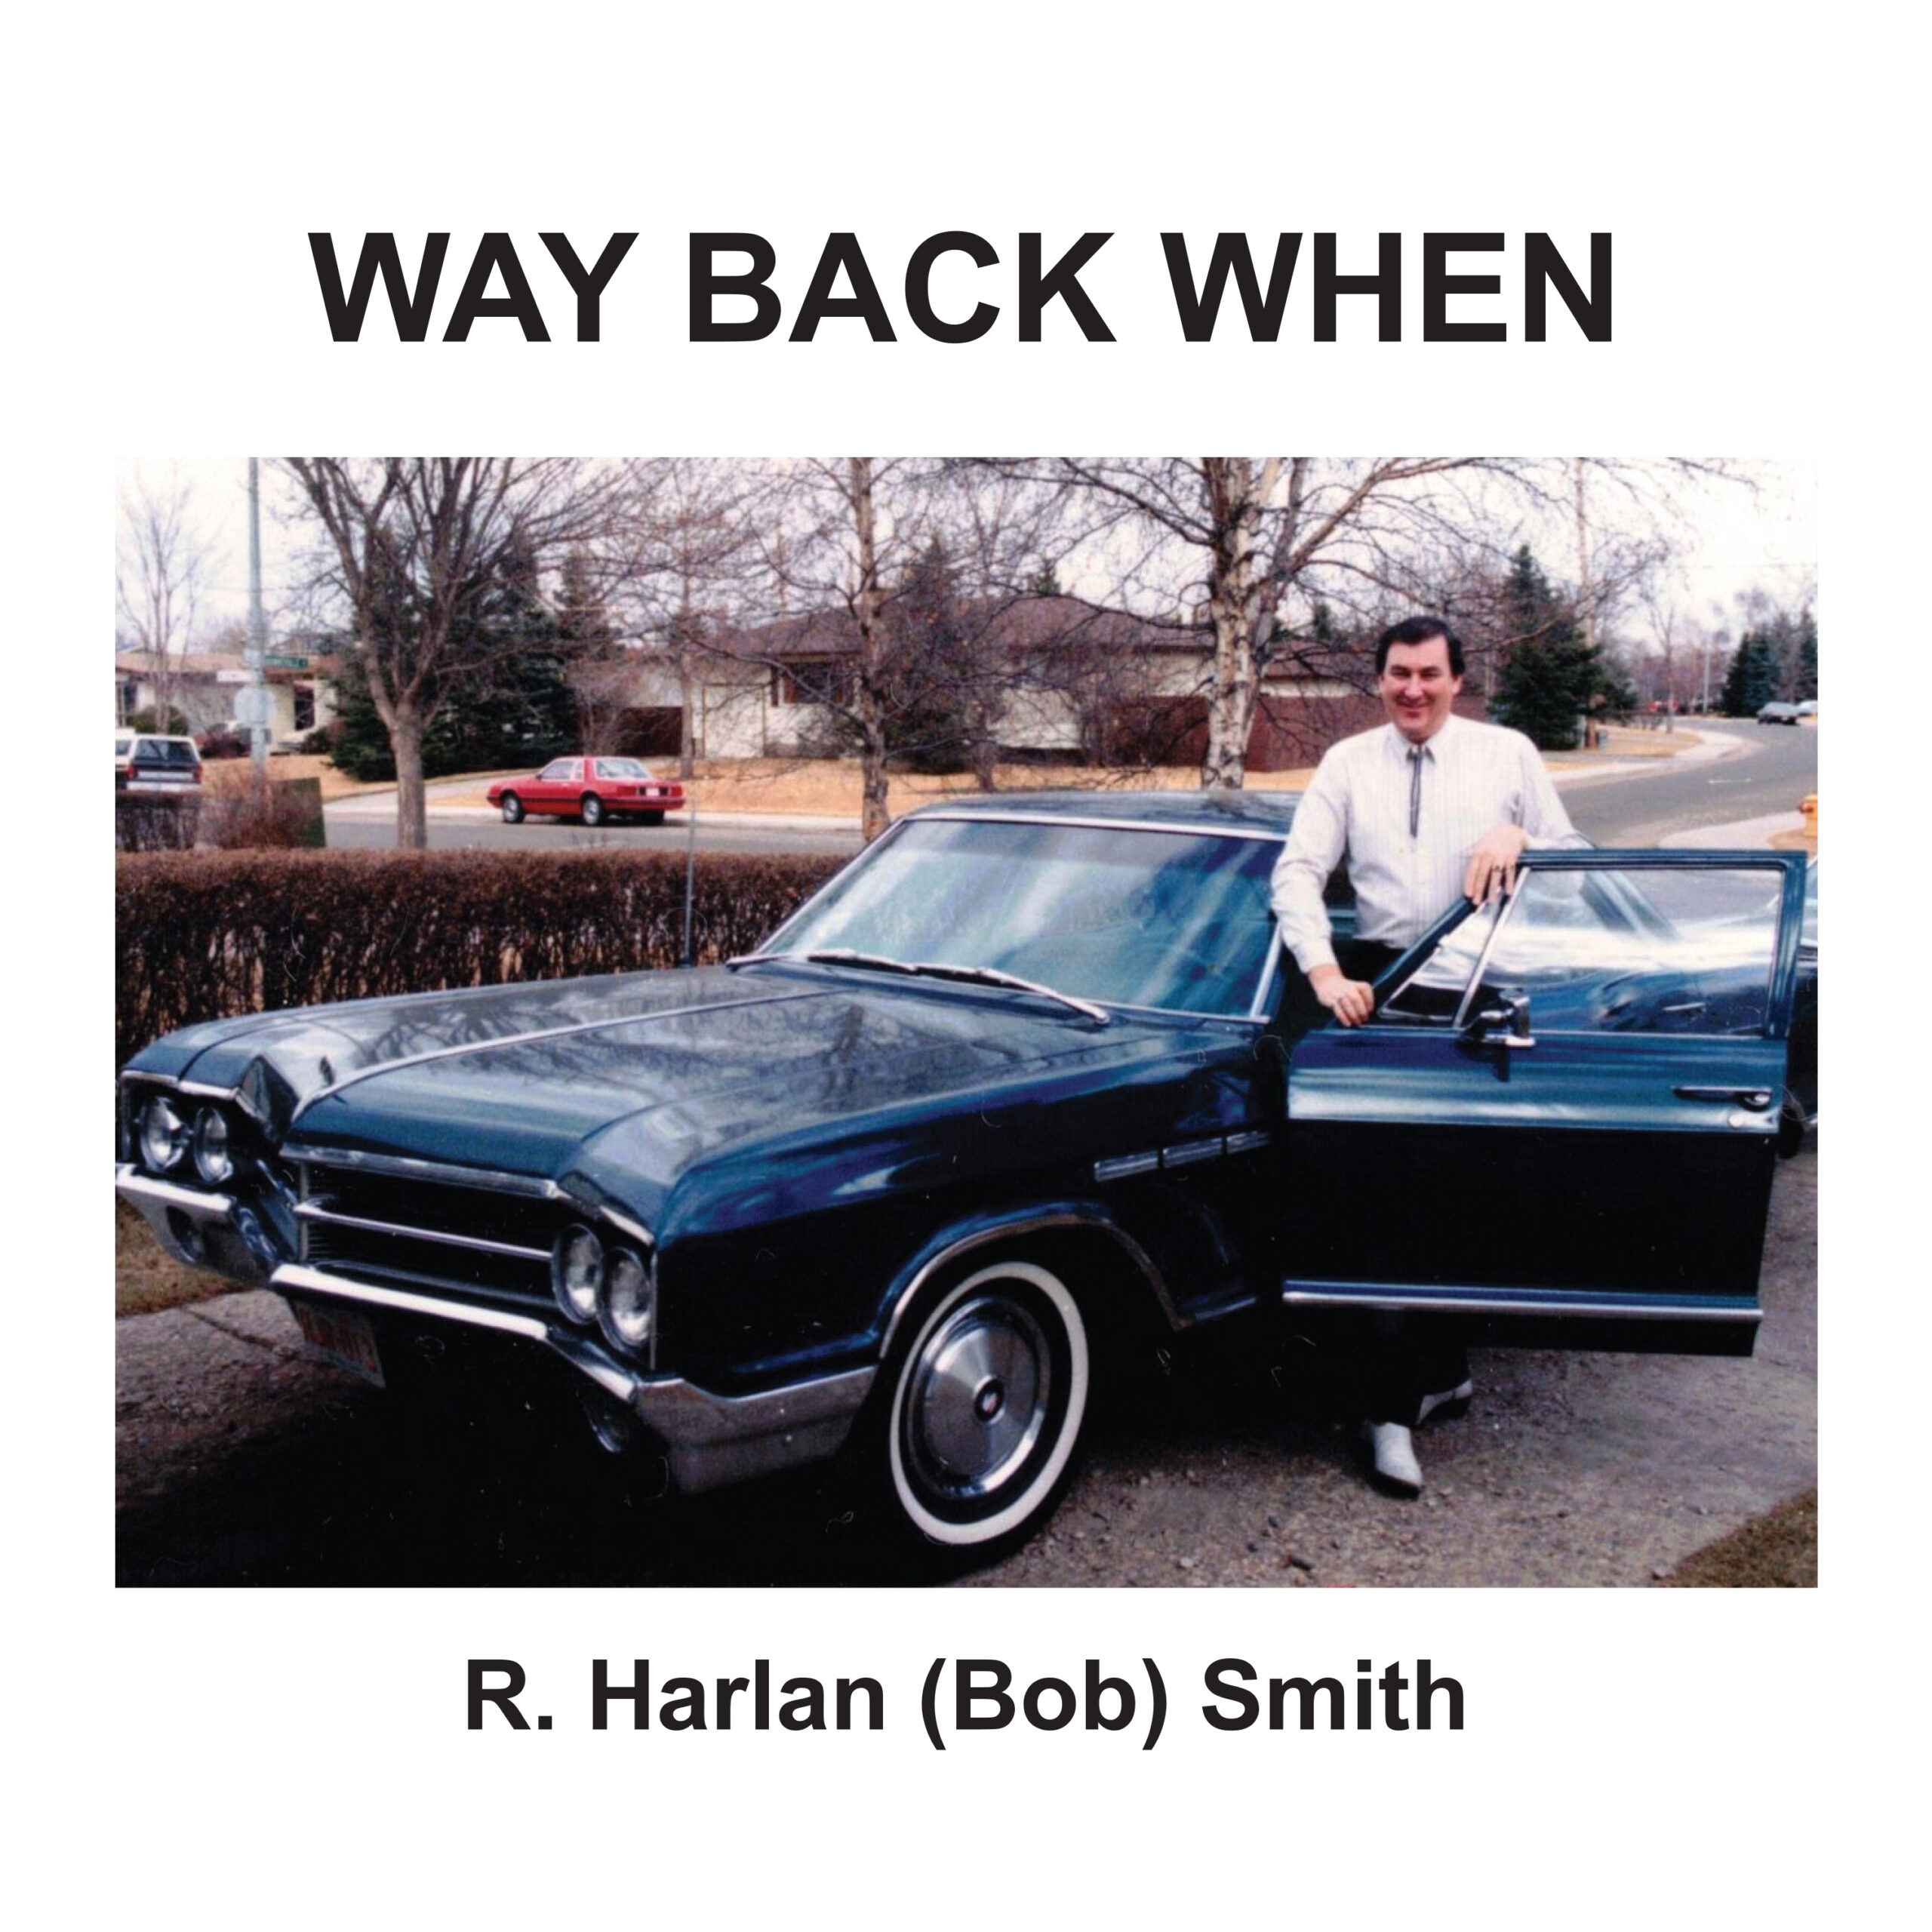 R. HARLAN SMITH SET TO RELEASE 10TH STUDIO ALBUM, LEADING WITH TITLE SONG ‘WAY BACK WHEN’